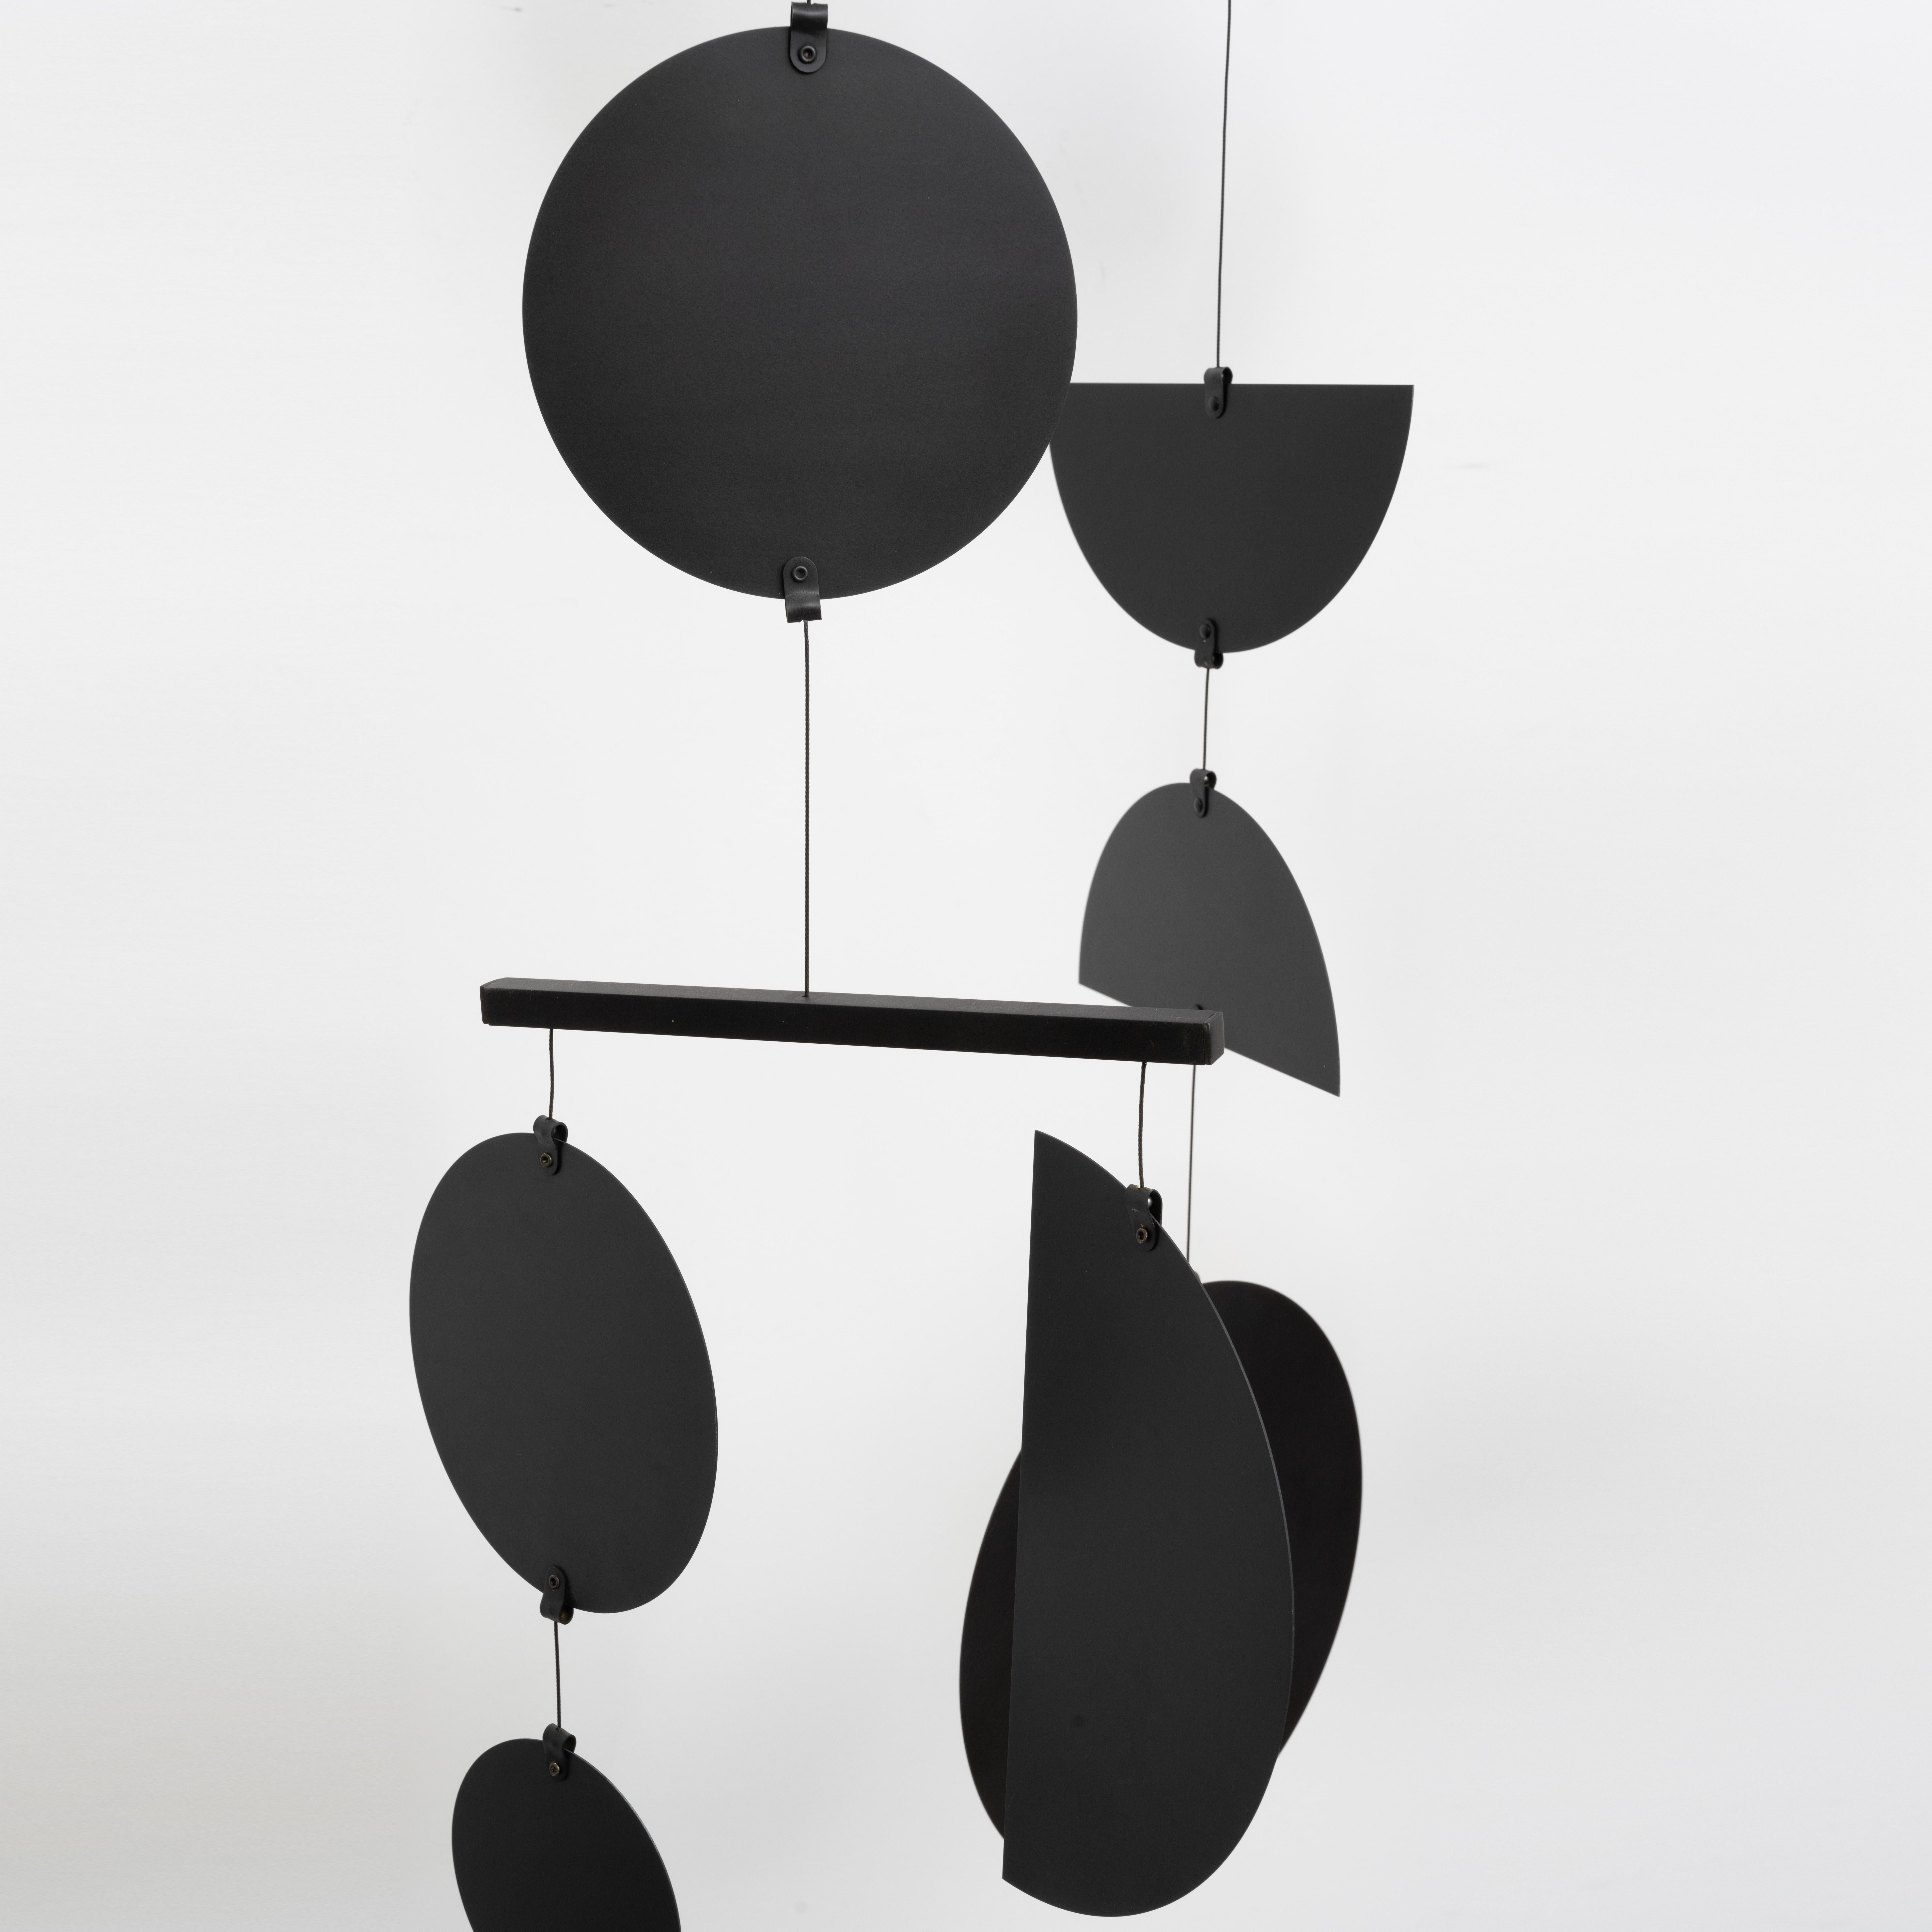 The Continuum Mobile is our most stunning mobile in both design and scale with visually cacophonous clusters of shapes that artfully glide between each other. The striking black patina adds depth and a graphic finish to this kinetic mobile. This